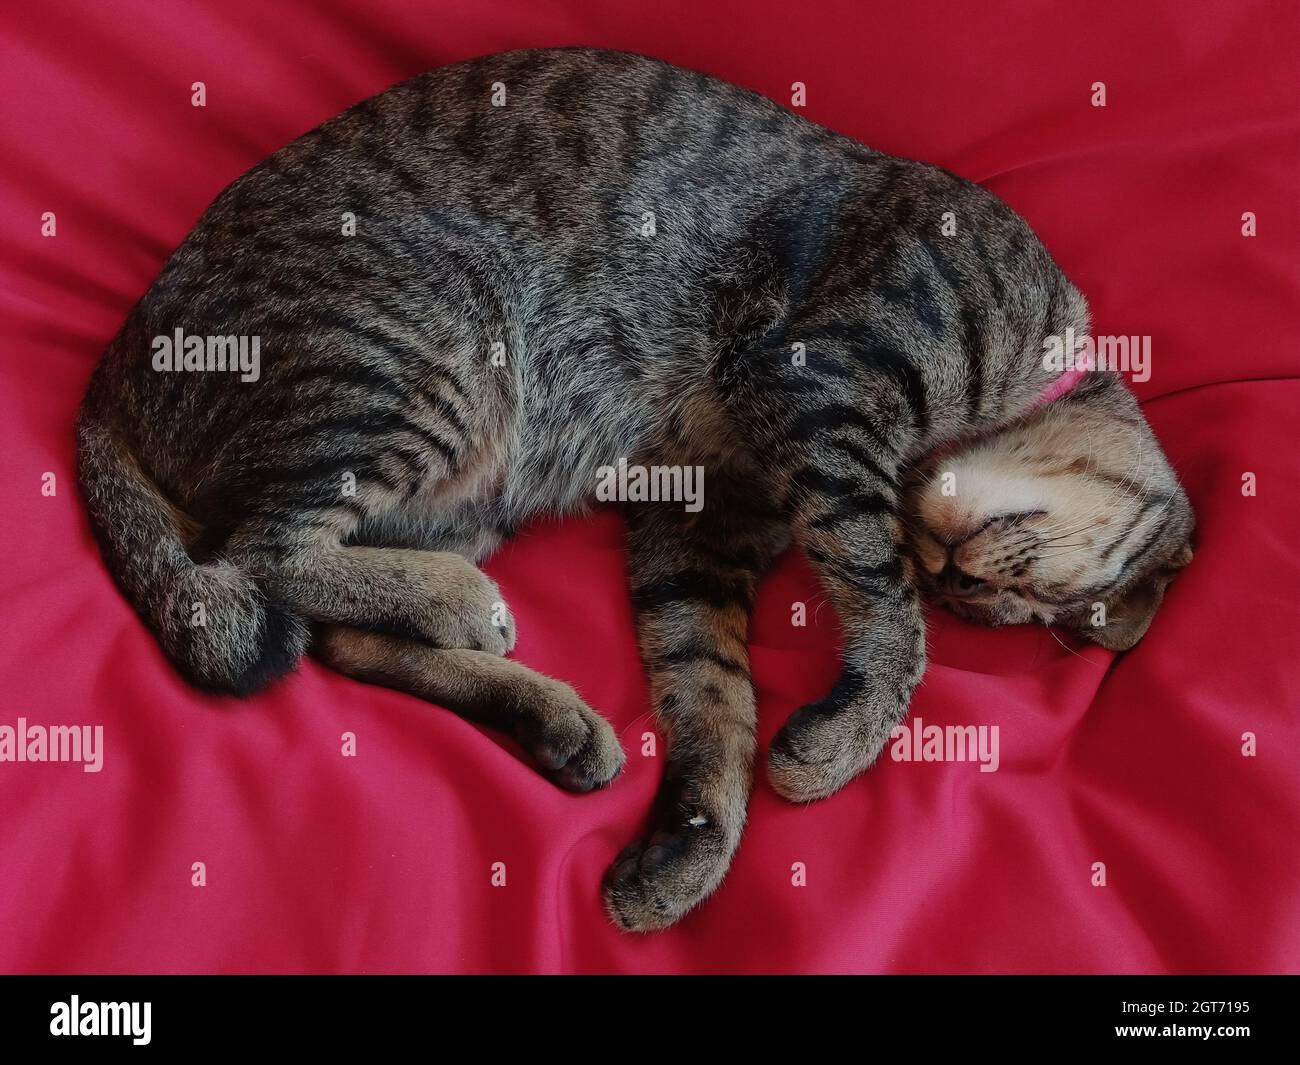 Close Up Of Sleeping Cat In Cute Kung Fu Pose Stock Photo - Alamy